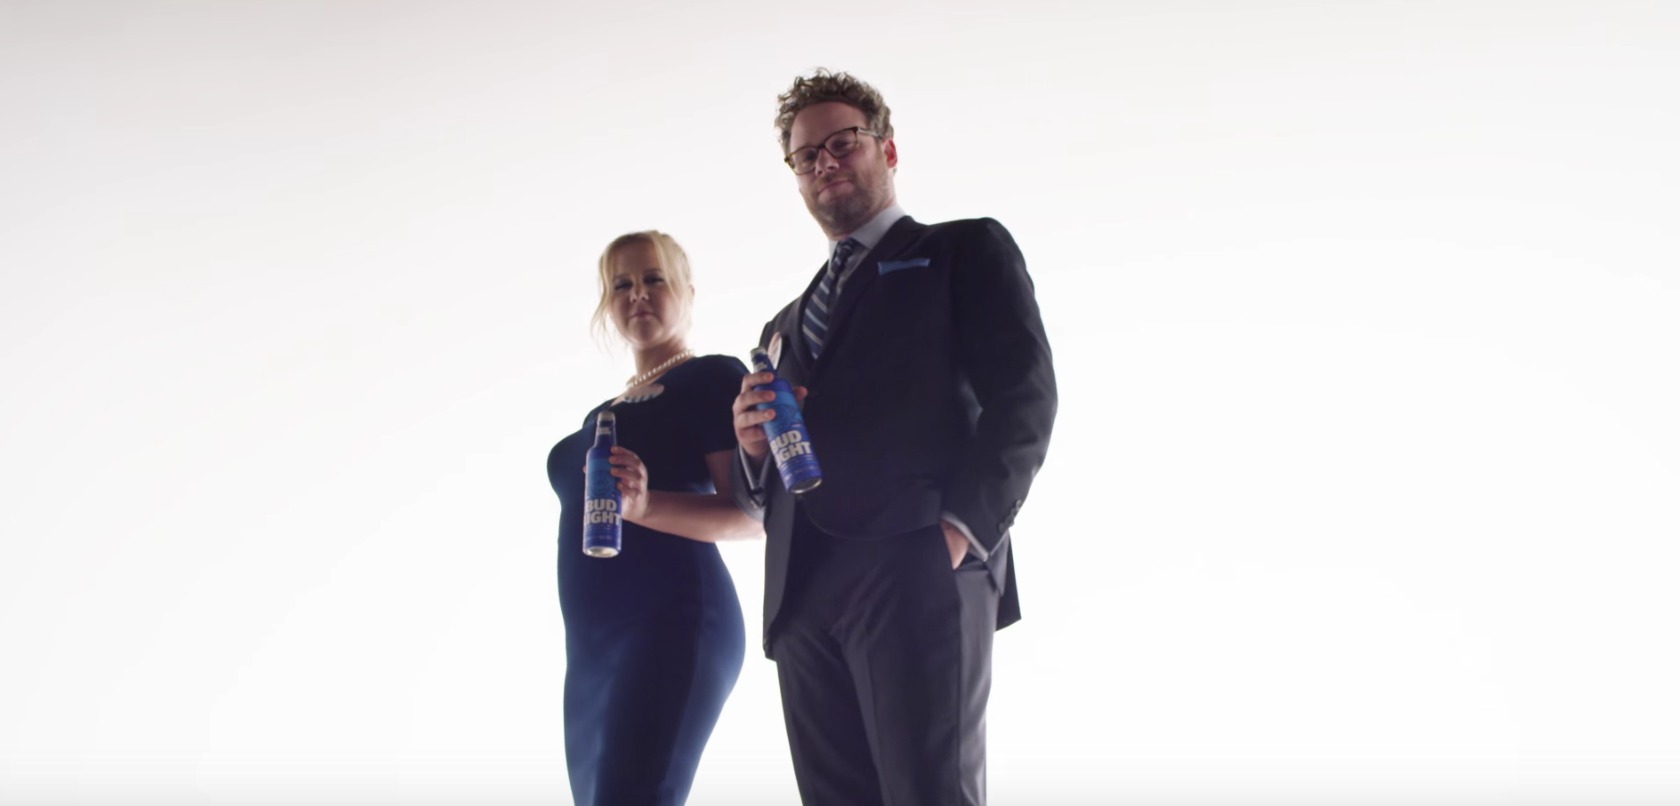 picture-of-amy-schumer-and-seth-rogen-bud-light-party-buttons-photo.jpg